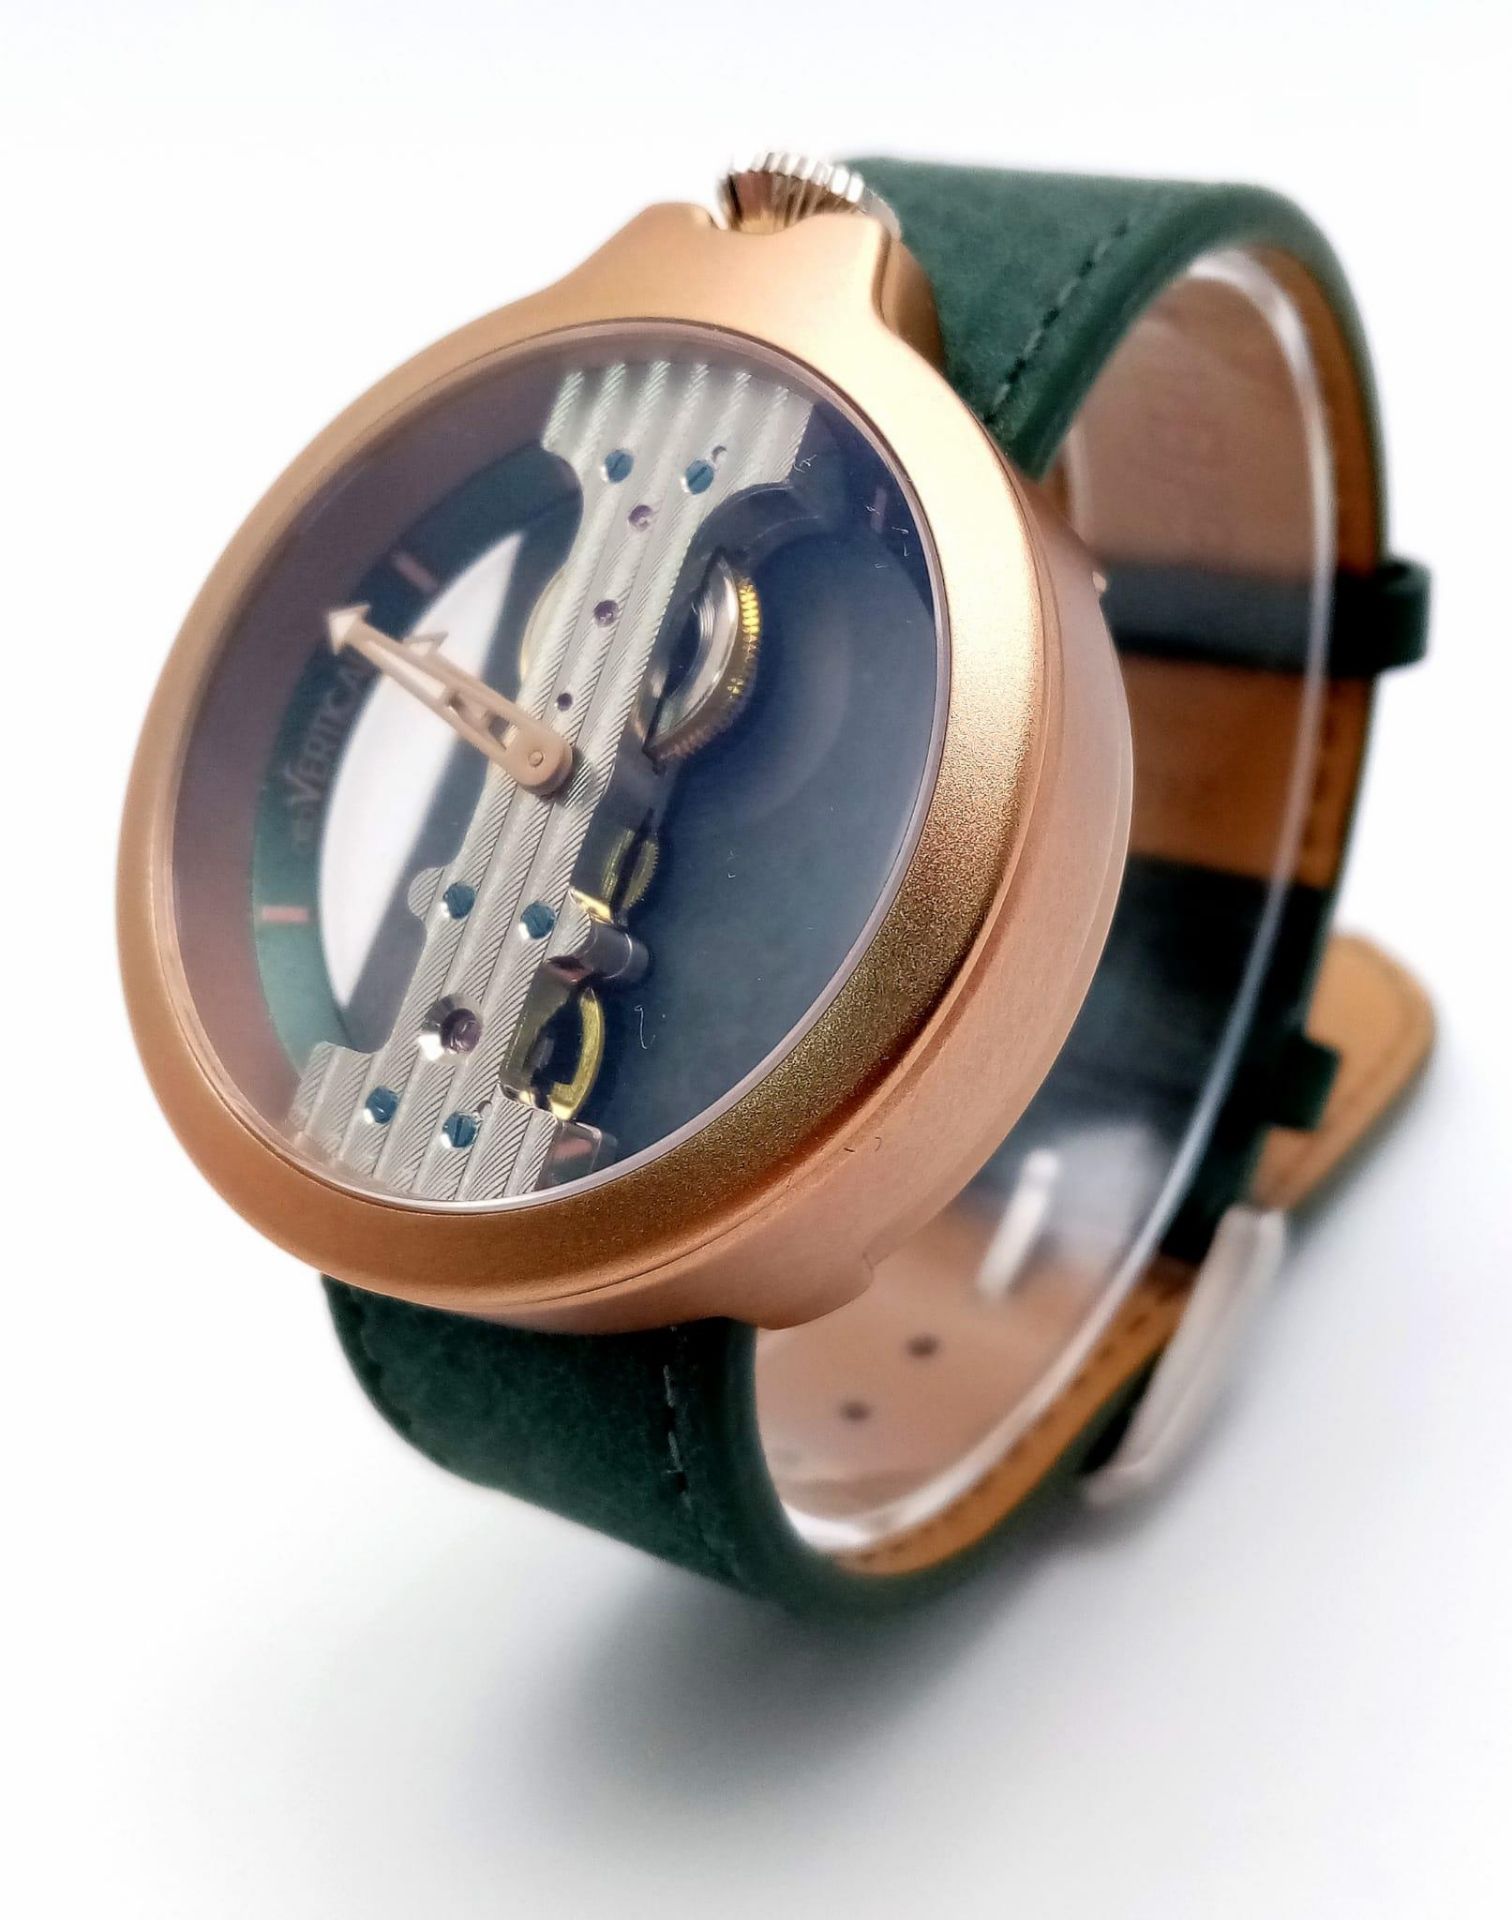 A Verticale Mechanical Top Winder Gents Watch. Green leather strap. Gold tone ceramic gilded